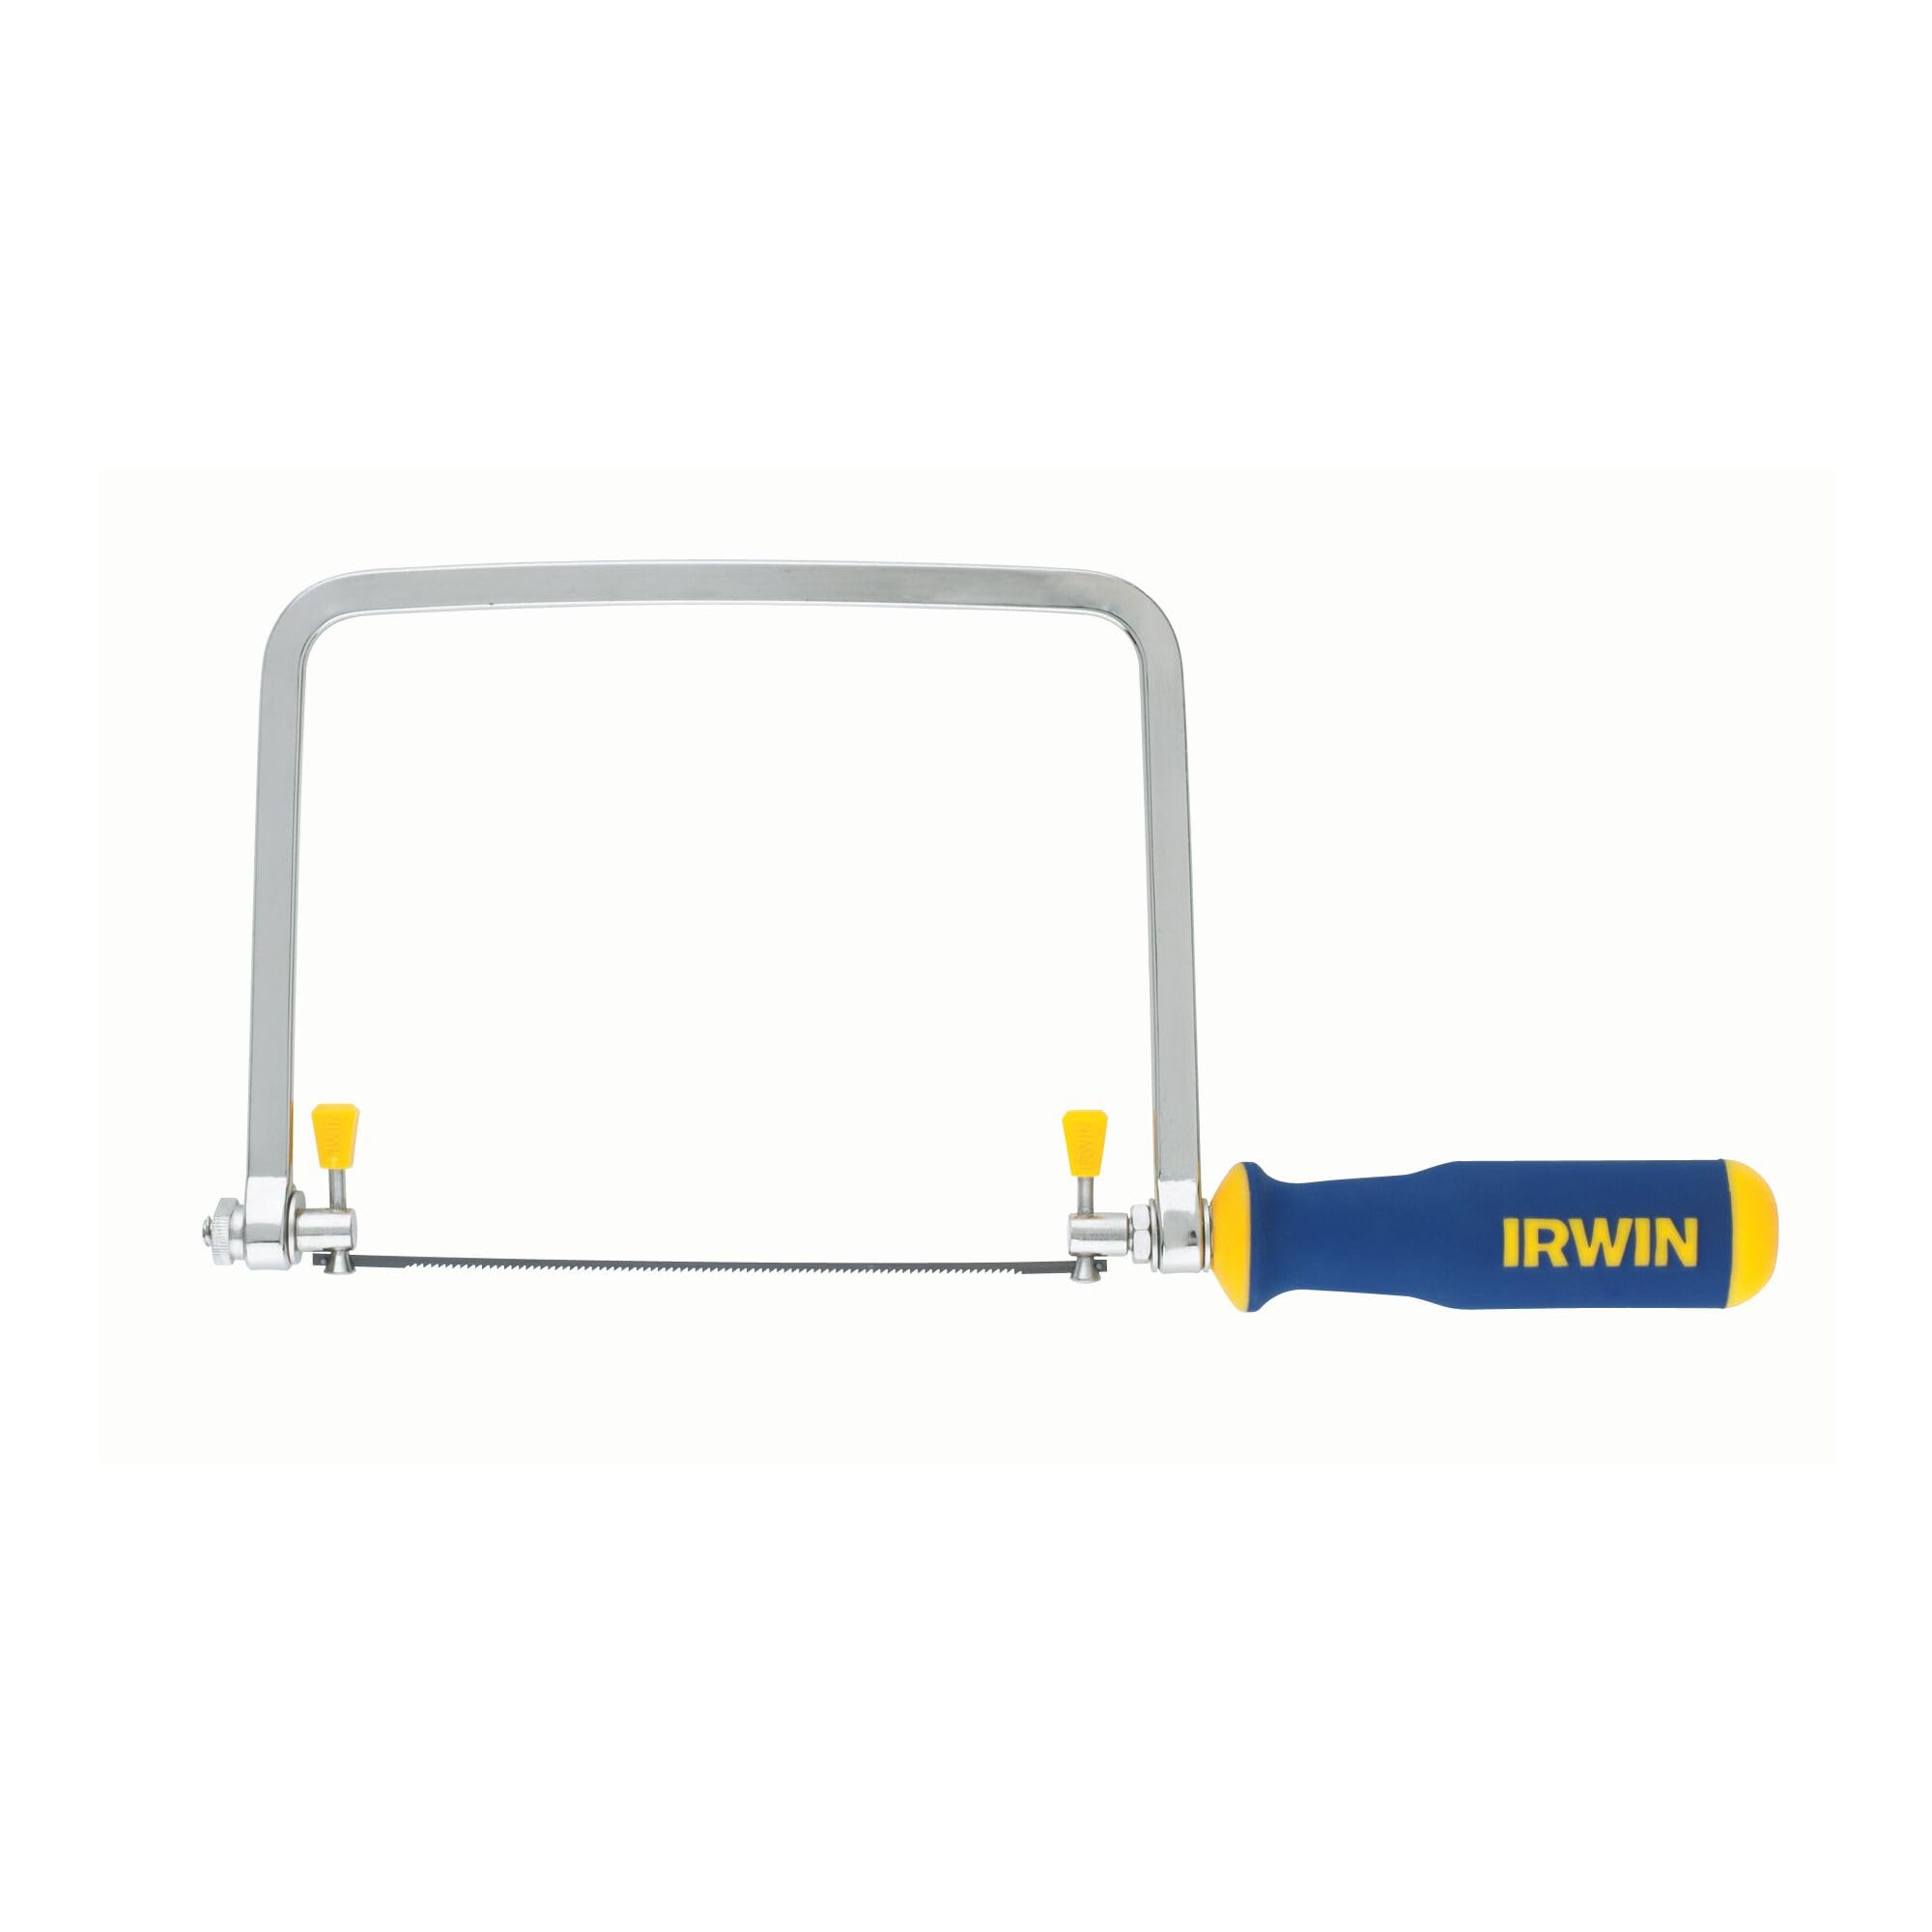 IRWIN Tools ProTouch Coping Saw (2014400), Blue & Yellow $7.99